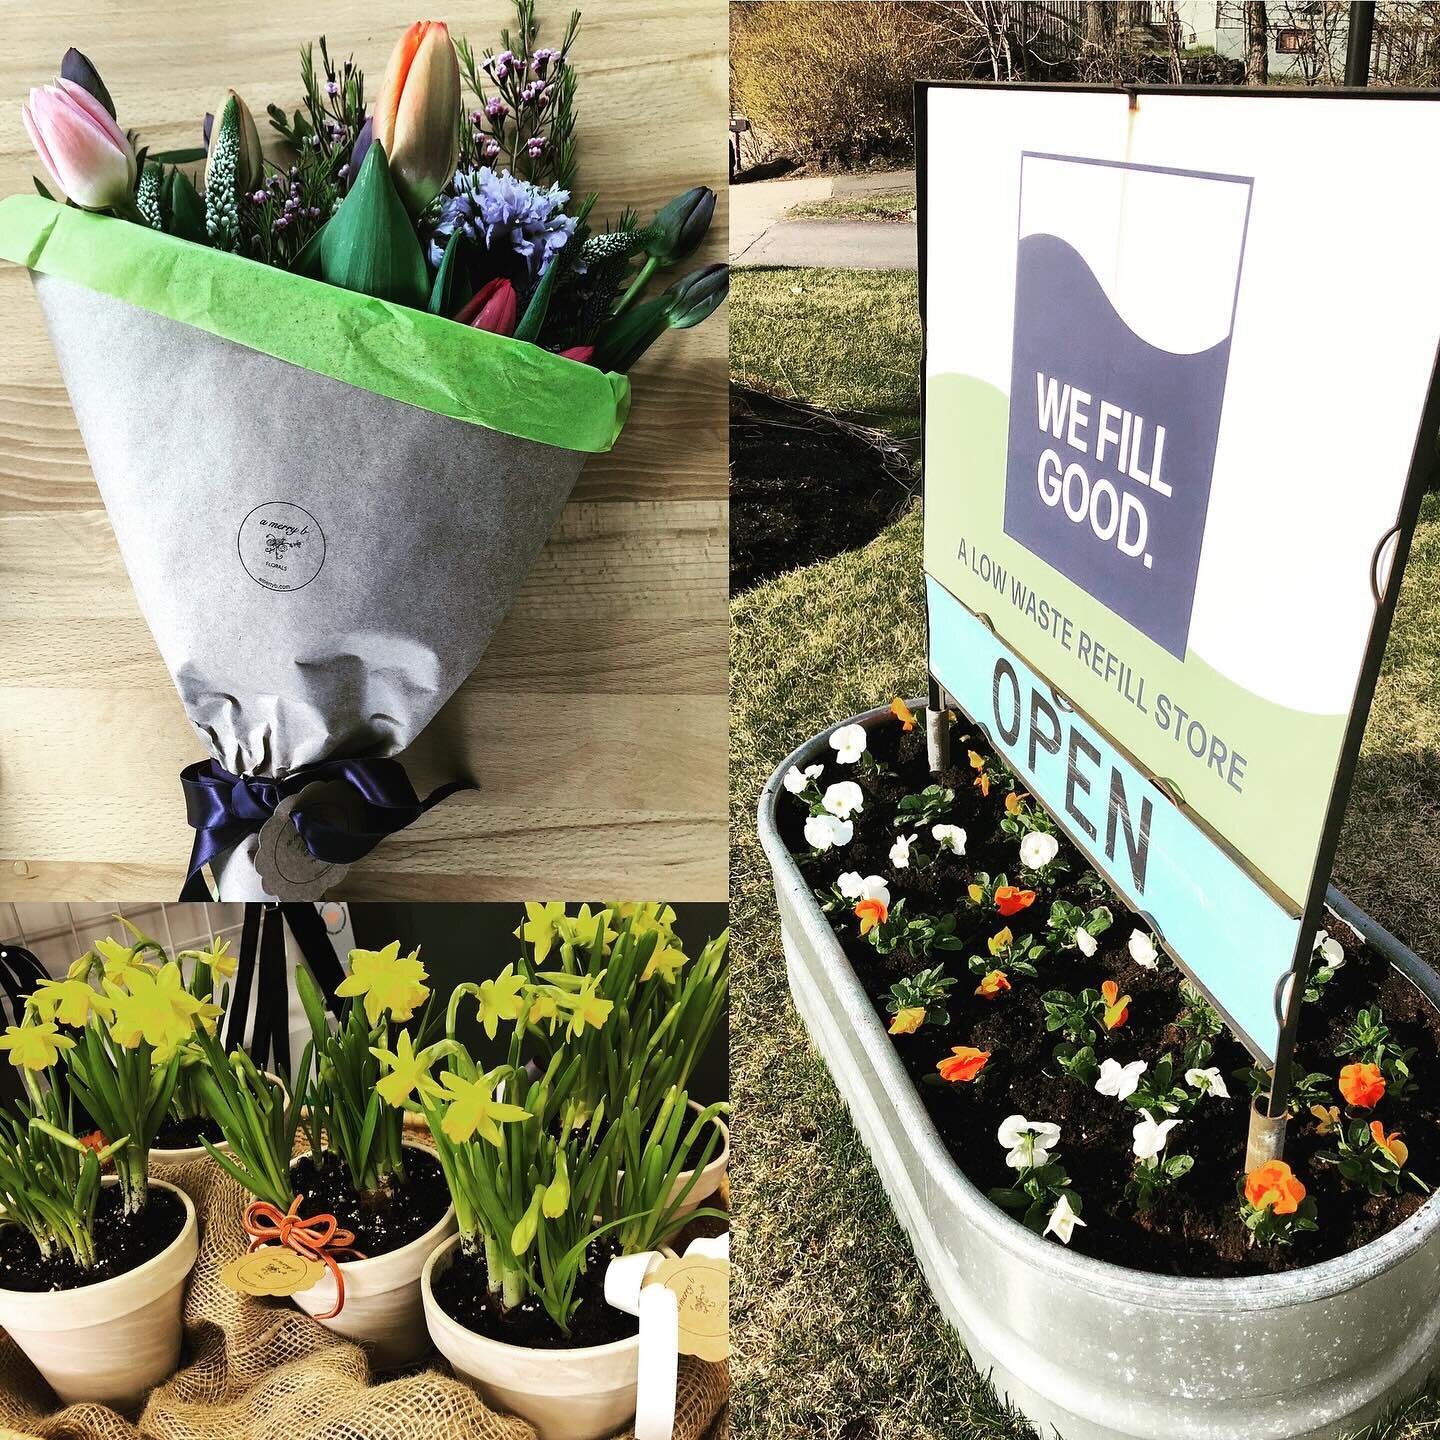 Spring Flower Pop Up!
@wefillgood 
Saturday, 3/30
11:30a-3p

🐣Stop by @wefillgood for some Easter goodies - the functional and sustainable kind, but also lovely and often locally made! Marla has stocked the shop with Easter basket treats and spring 